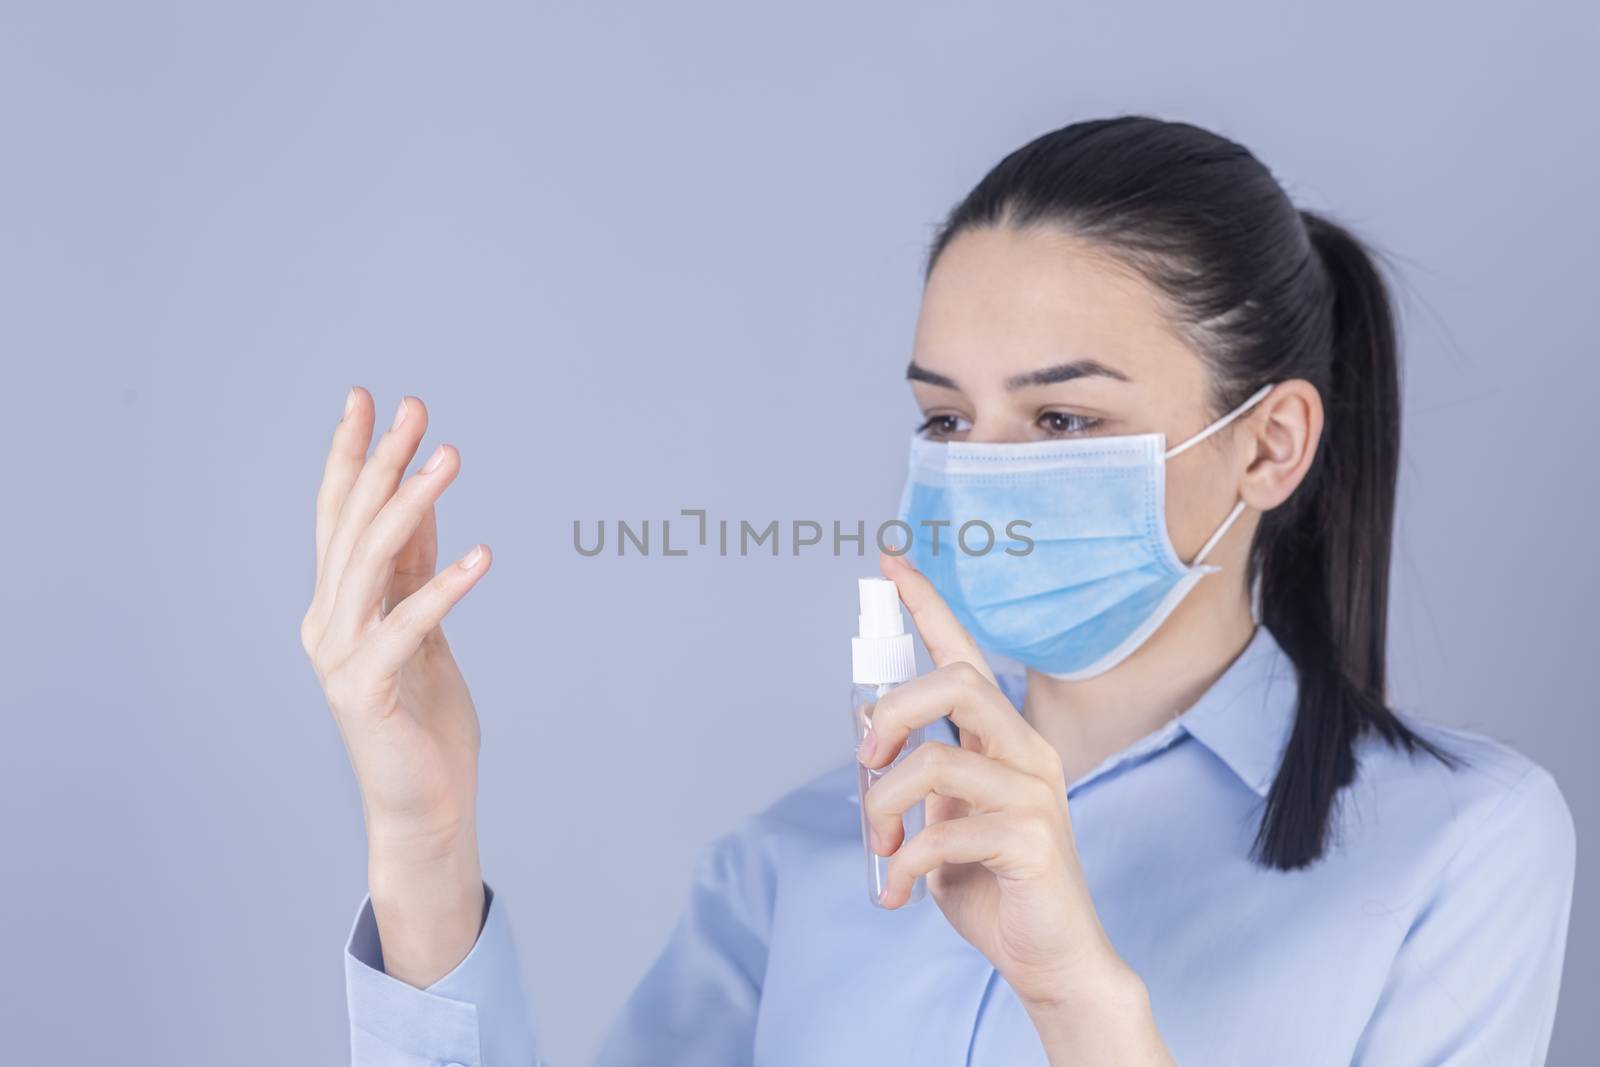 COVID-19 Pandemic Coronavirus. Girl with protective mask holdding alcohol spray cleaning protect disease covid 19. Antiseptic, Hygiene and Healthcare concept. Focus on hand.